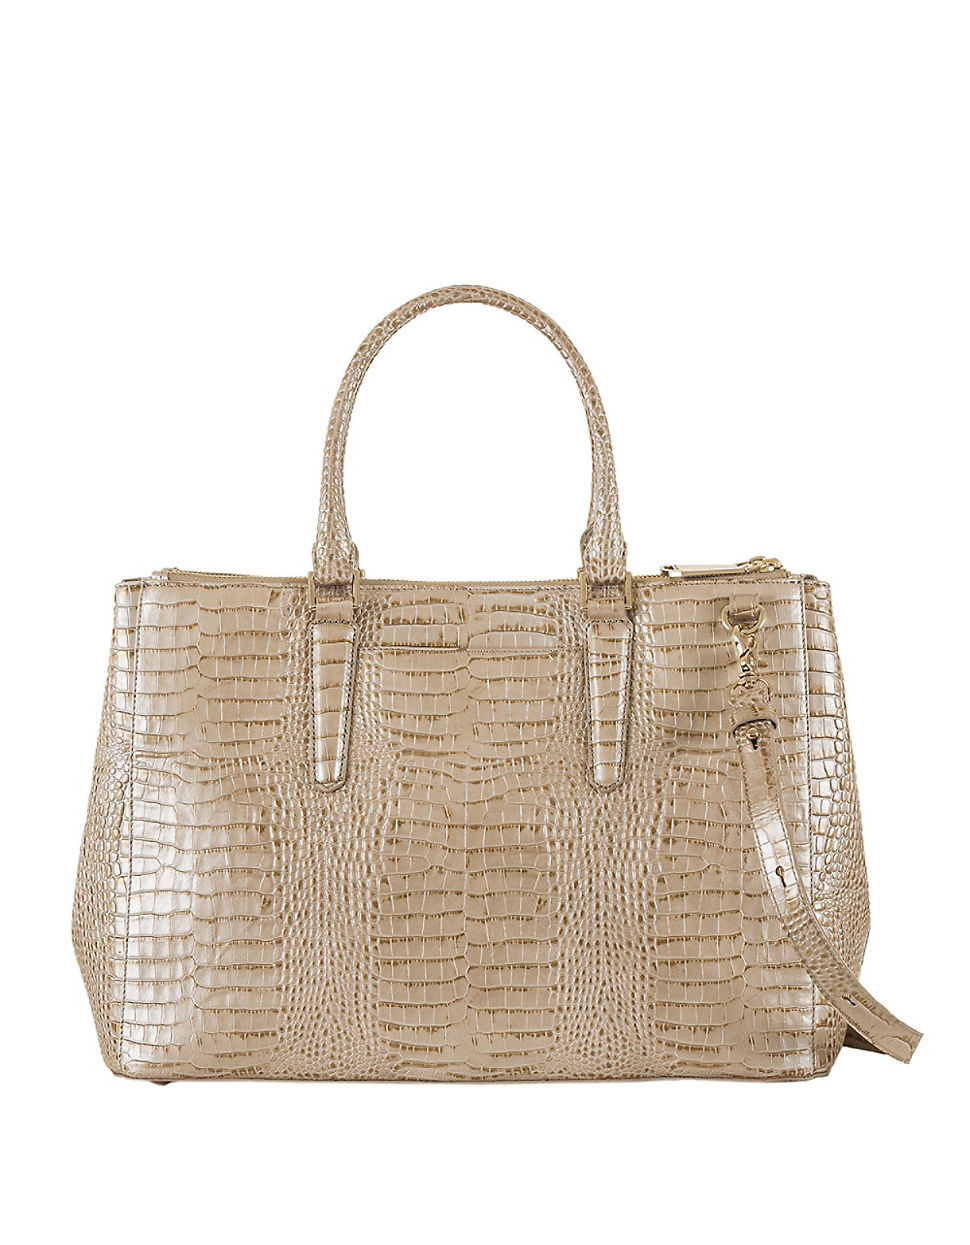 Lyst - Brahmin Lincoln Majestic Leather Satchel in Natural